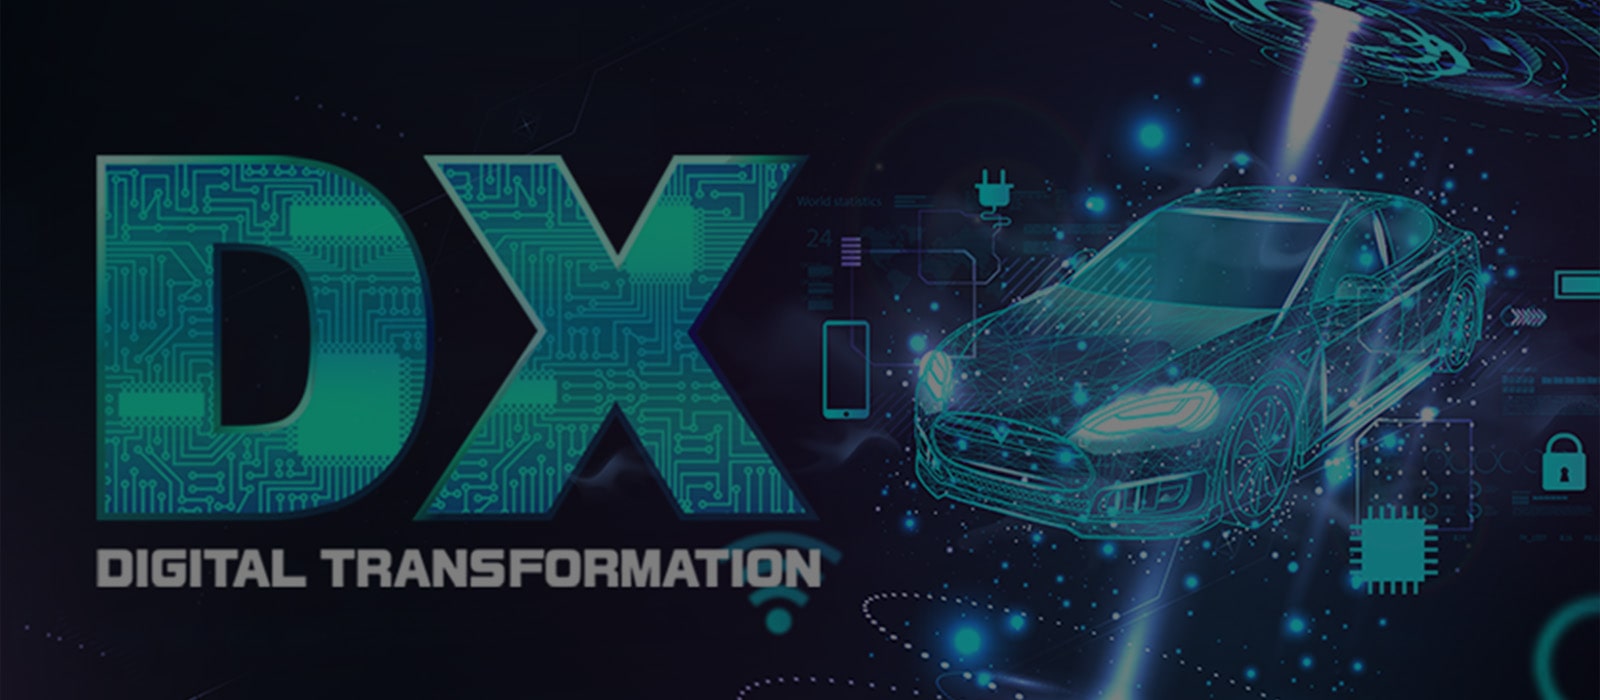 Part 31. [Mobility Inside] Digital Transformation (DX) Guides the Future of the Automobile Industry